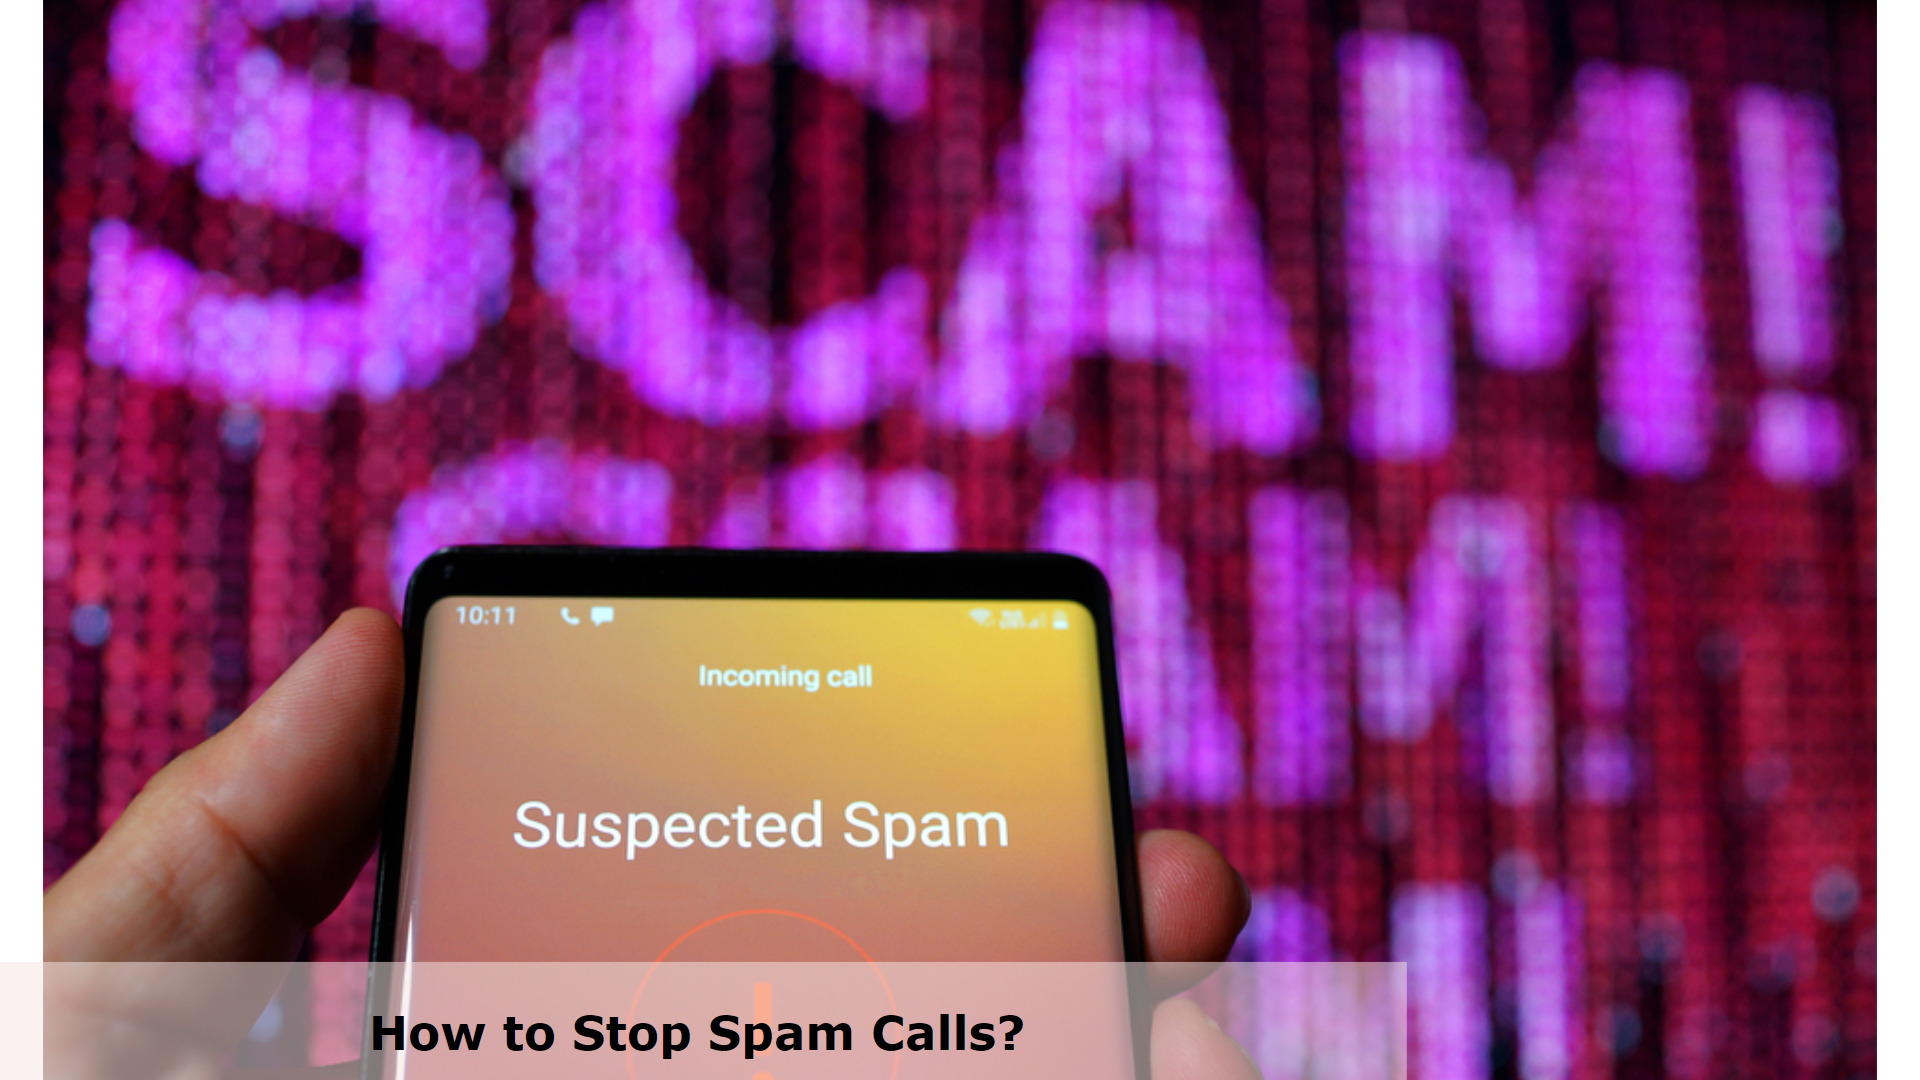 How do I stop international calls from unknown numbers?, Spam Calls Singapore, How do I block an unknown number internationally?, Can I block all international calls?, Nuisance Calls, How do I stop spam calls in Singapore?, How do you identify a spam call?, How do I report a spam number to Singapore?, Can I block all international calls?, Why am I getting random calls from international numbers?, How to spot a scam call?, how to stop spam calls singapore, scamshield singapore, anti-scam centre singapore contact, report phone number singapore, scammer list, who call me from this number singapore, call from unknown number singapore, scamshield whatsapp, Why am I getting random calls from international numbers?,
